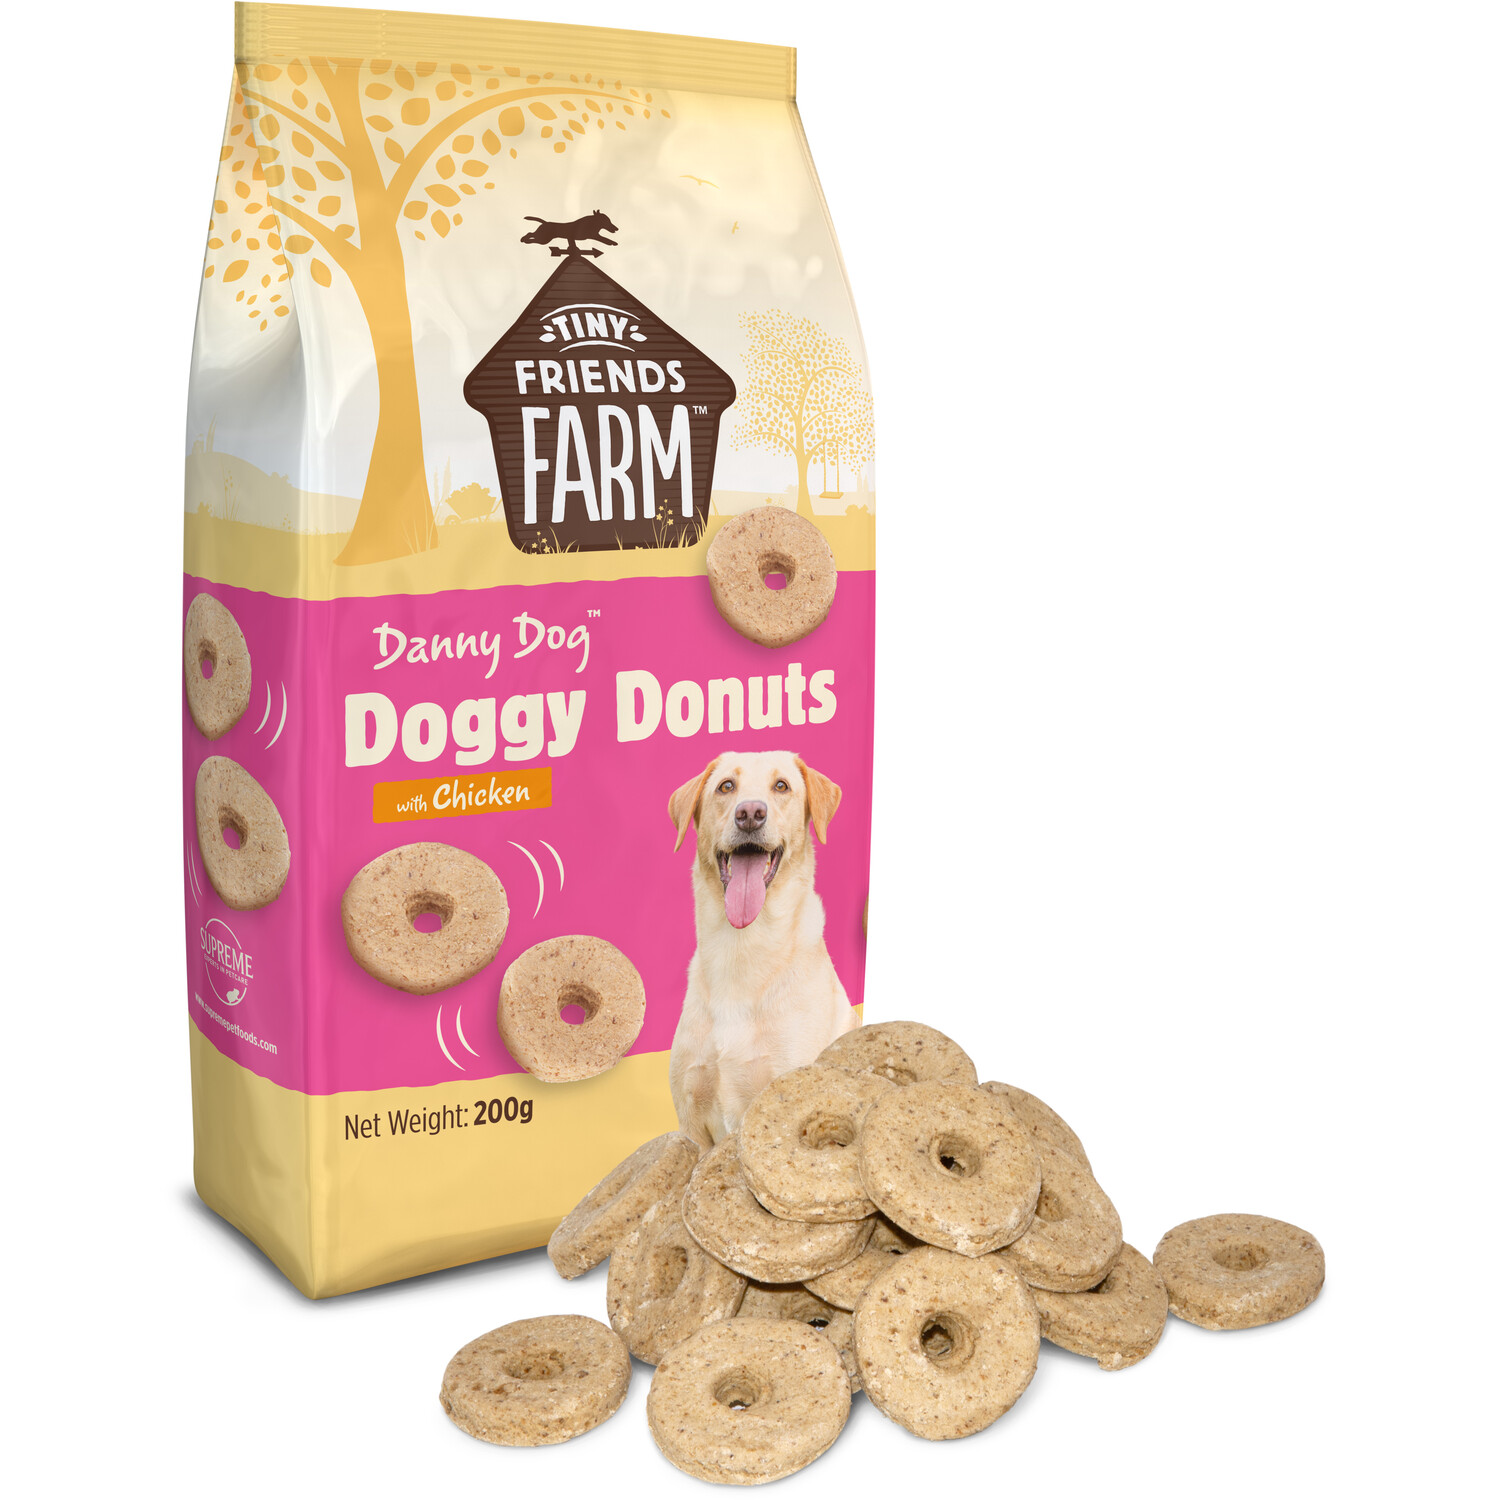 Doggy Donuts with Chicken Image 4